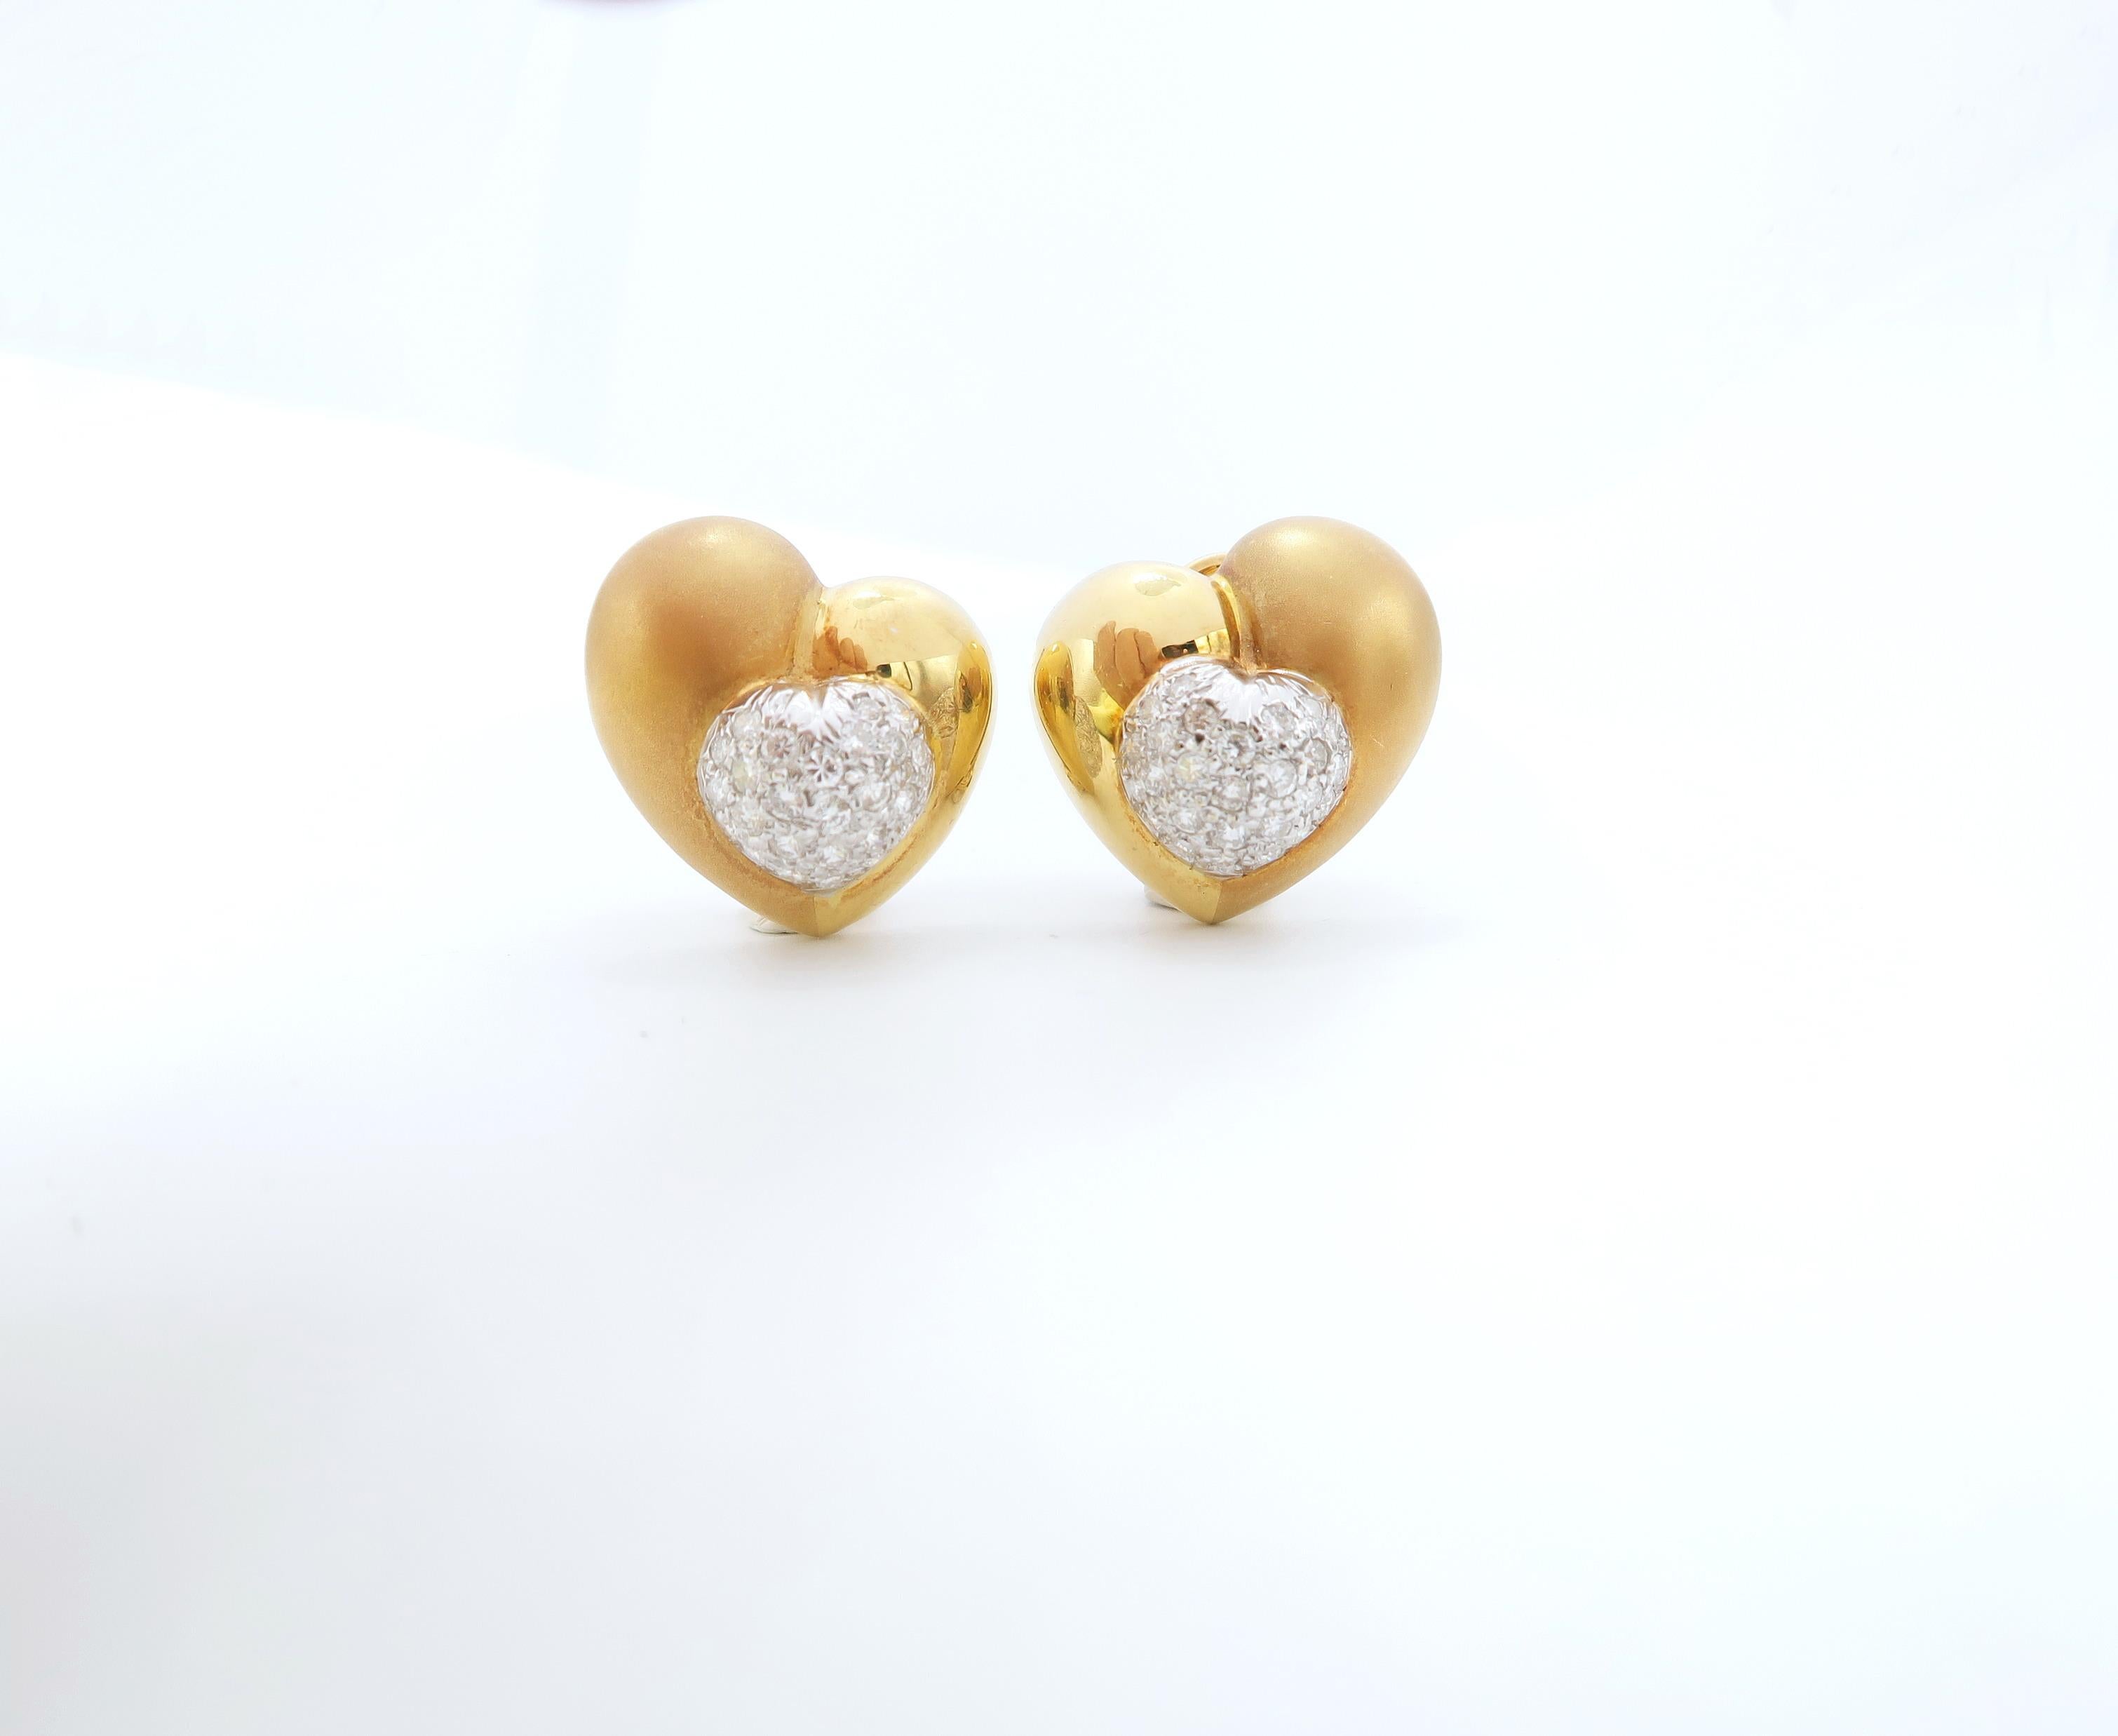 Heart Shaped 18K Gold Clip on Pierced Earrings with Diamond

Diamond : 1.15ct.
Gold : 18K Yellow Gold 13.35g.